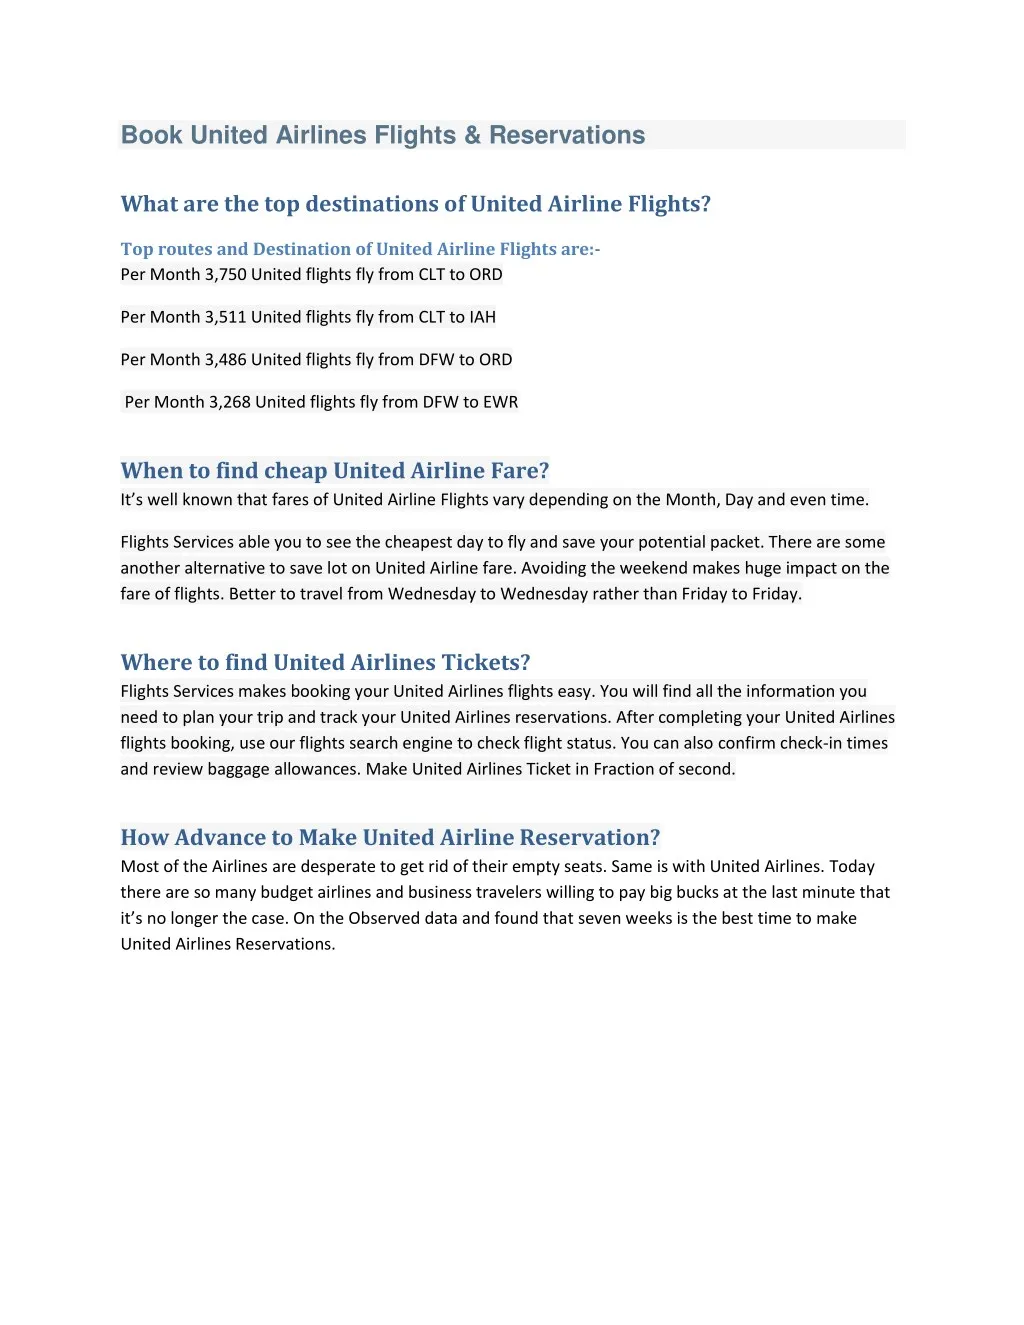 book united airlines flights reservations